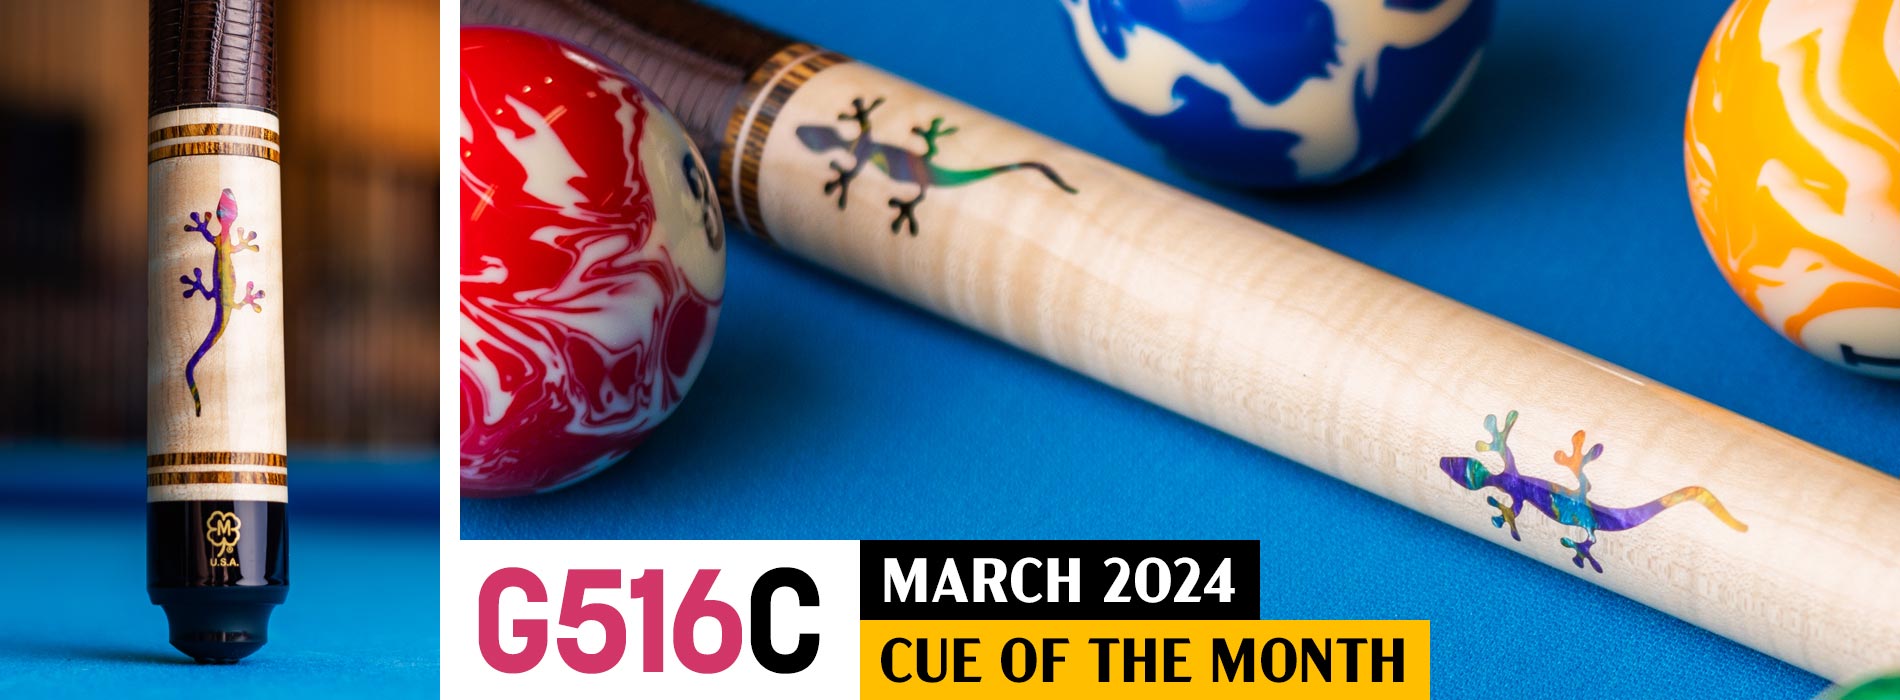 G516C March 2024 of the Month